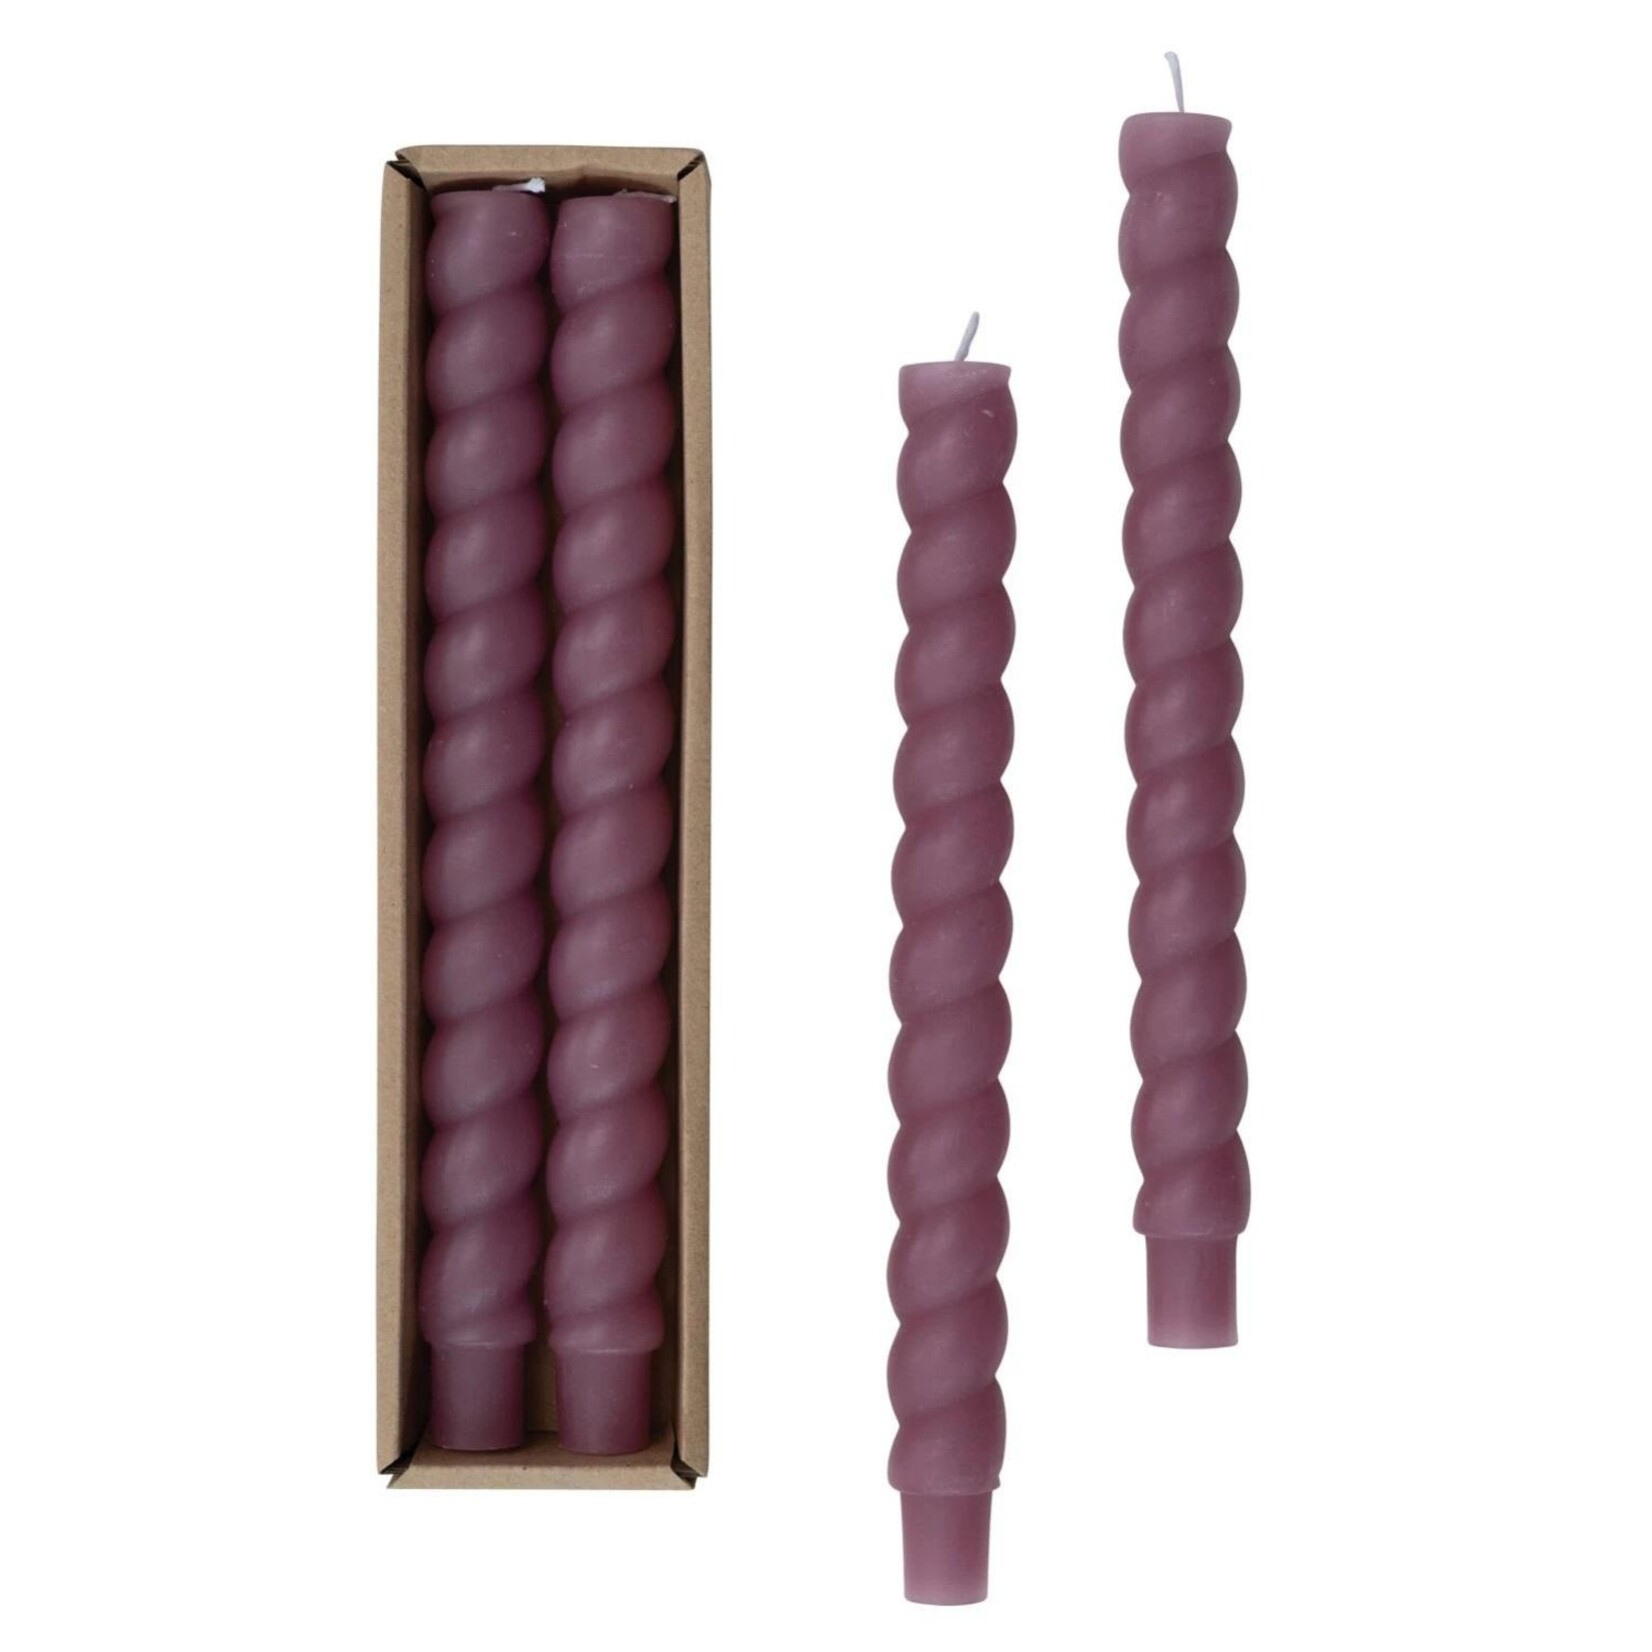 Twisted Taper Candles, Set of 2 - Pinot